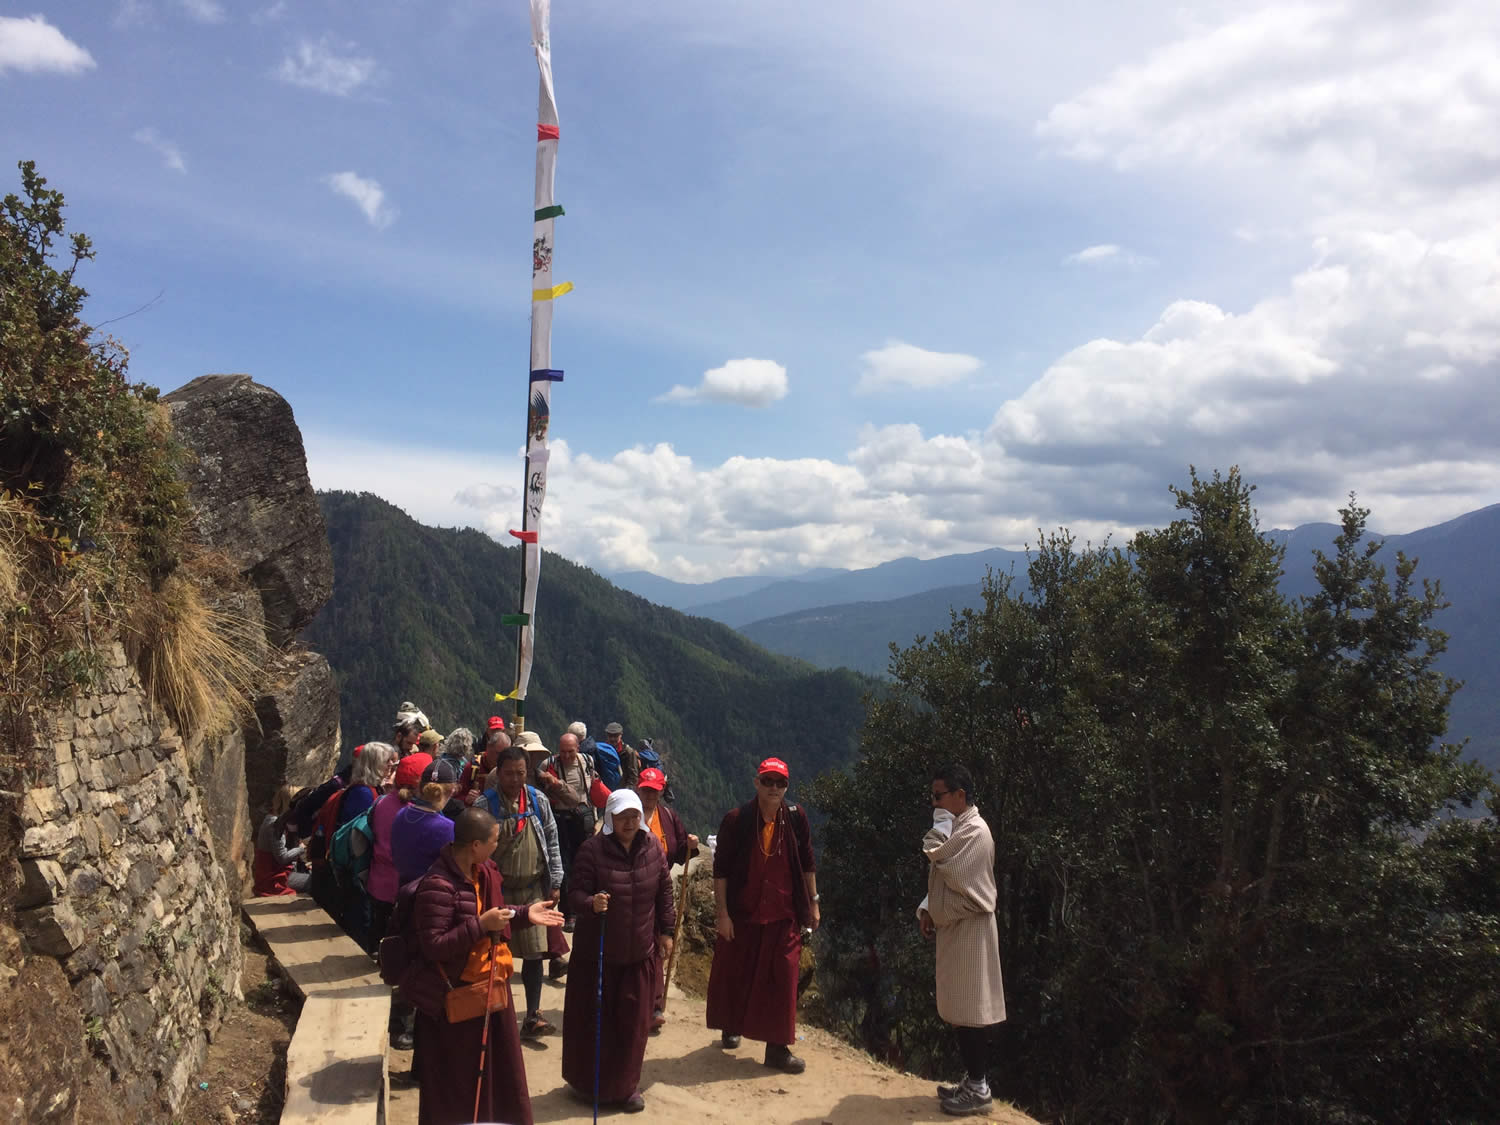 Rinpoche and group descending from Taktsang.